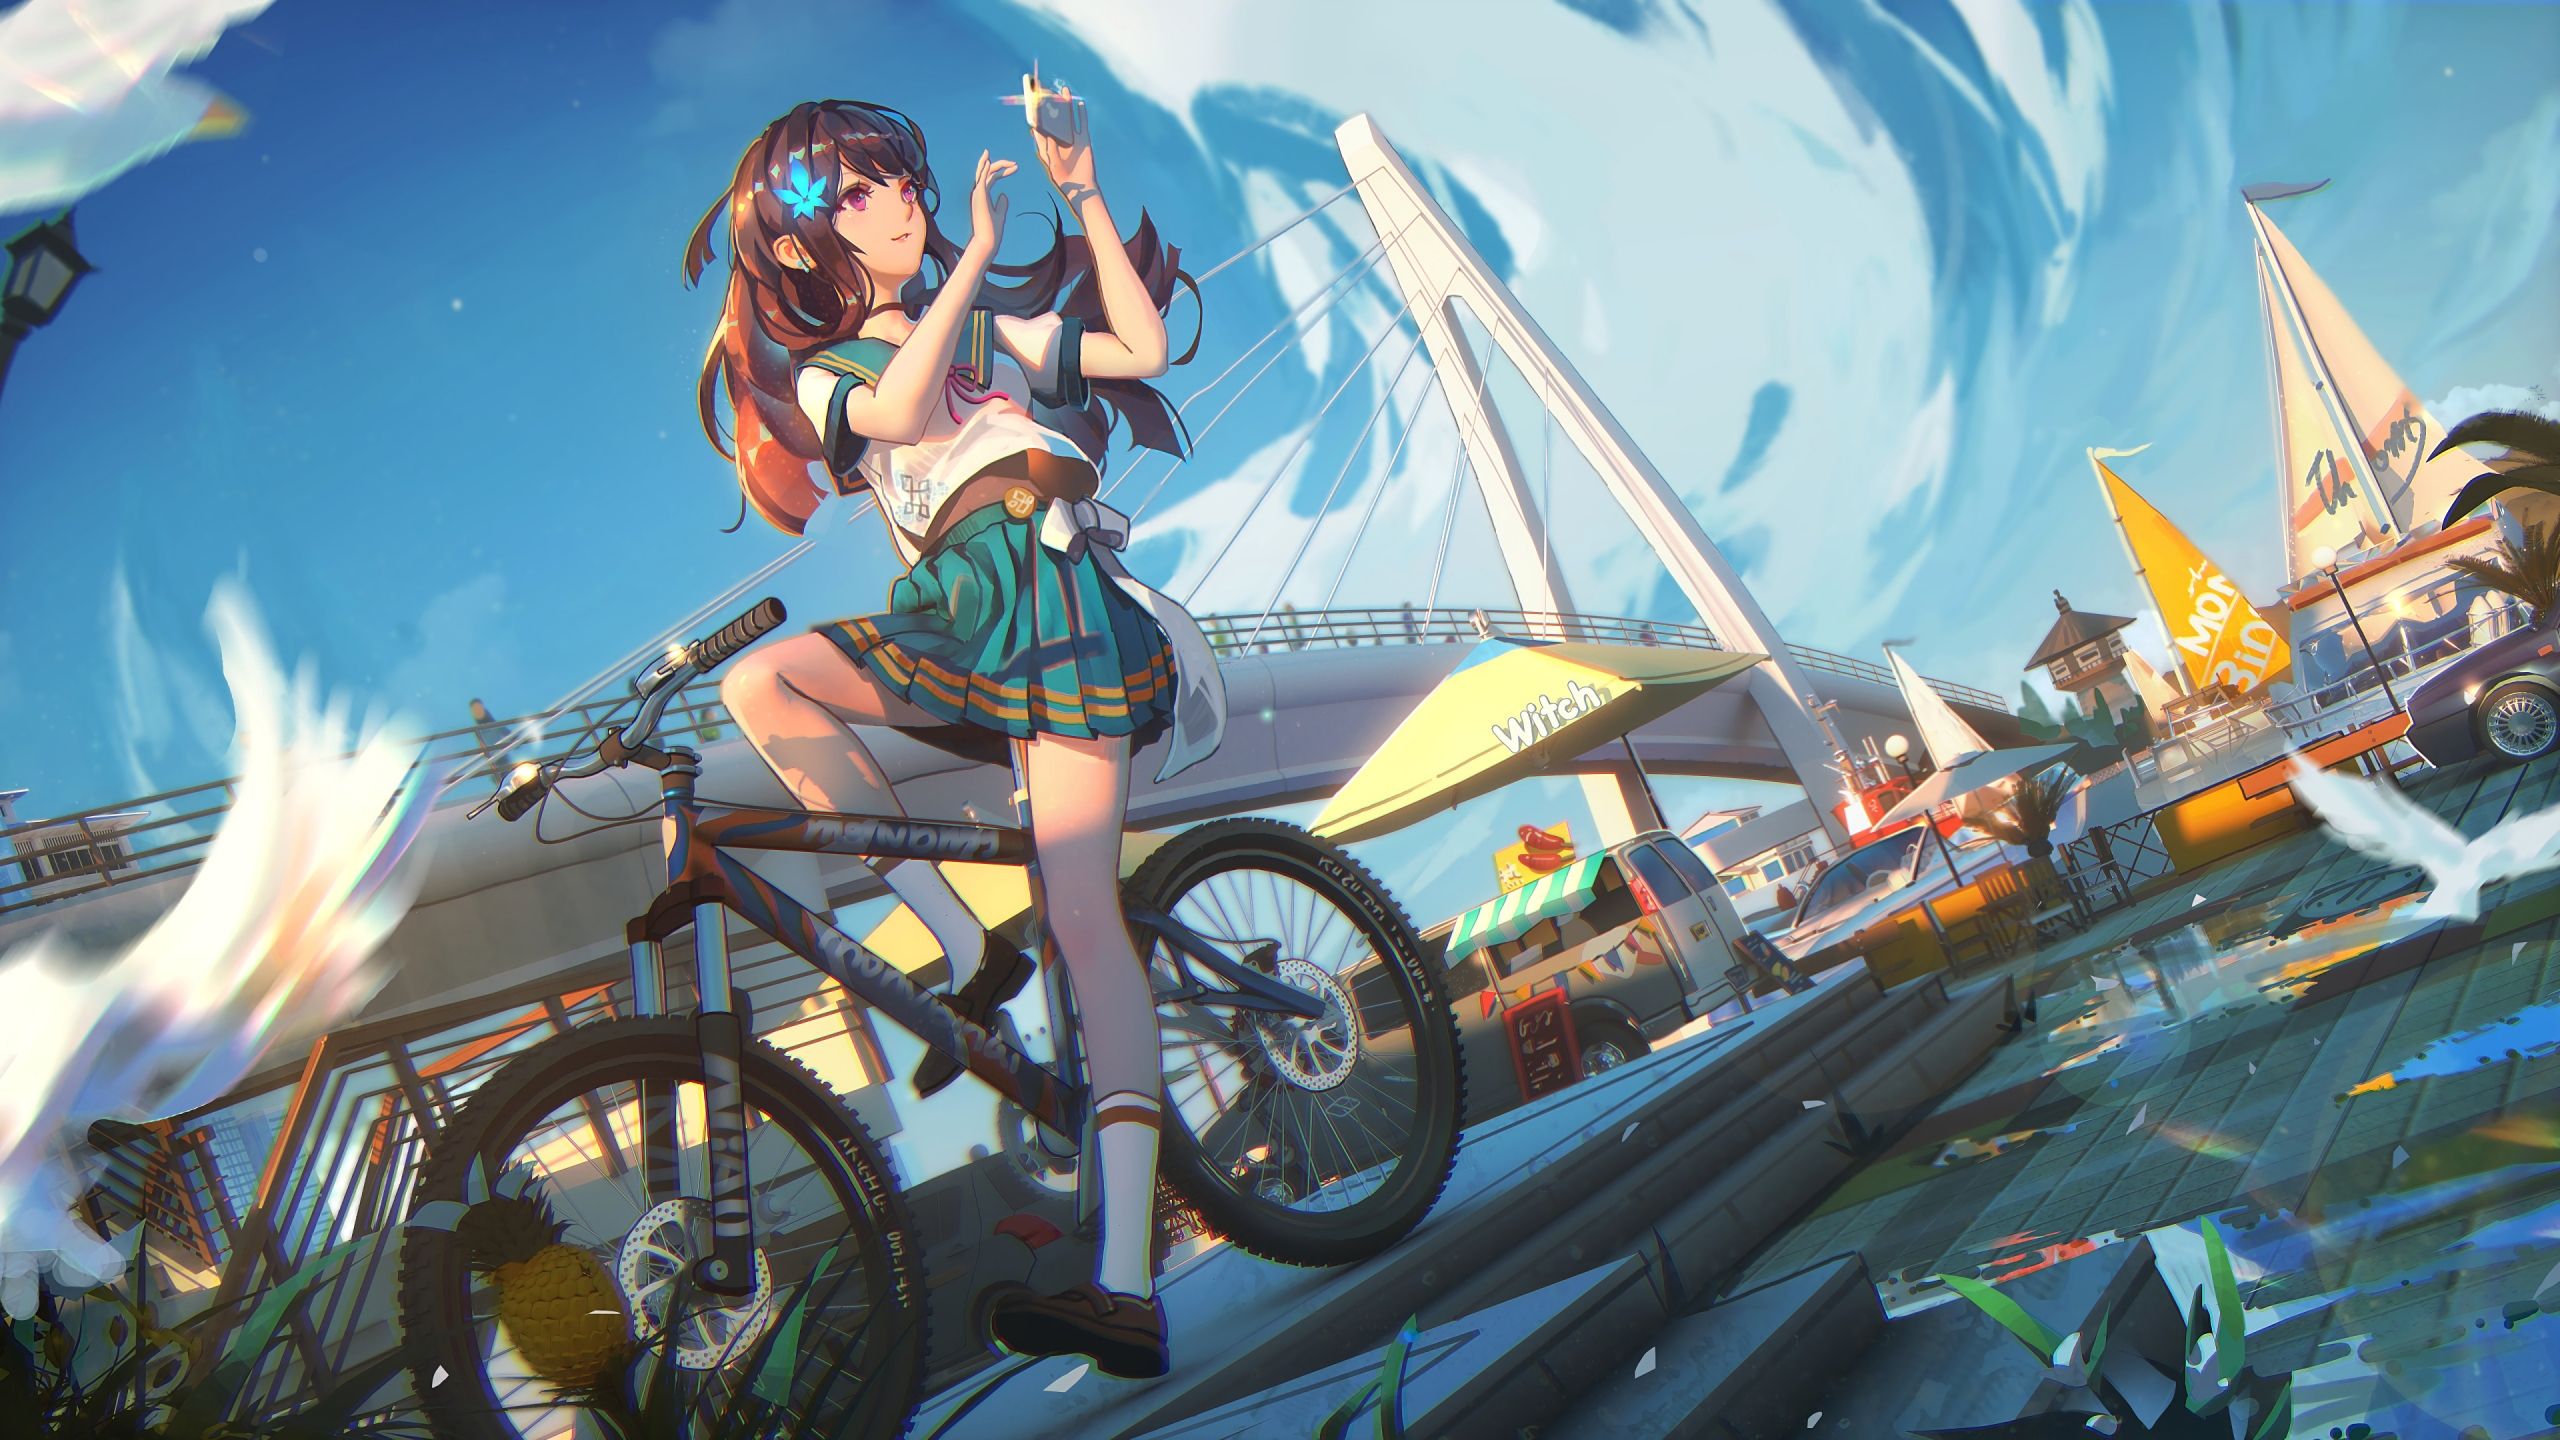 Anime student girl on a bicycle Wallpaper 4k Ultra HD